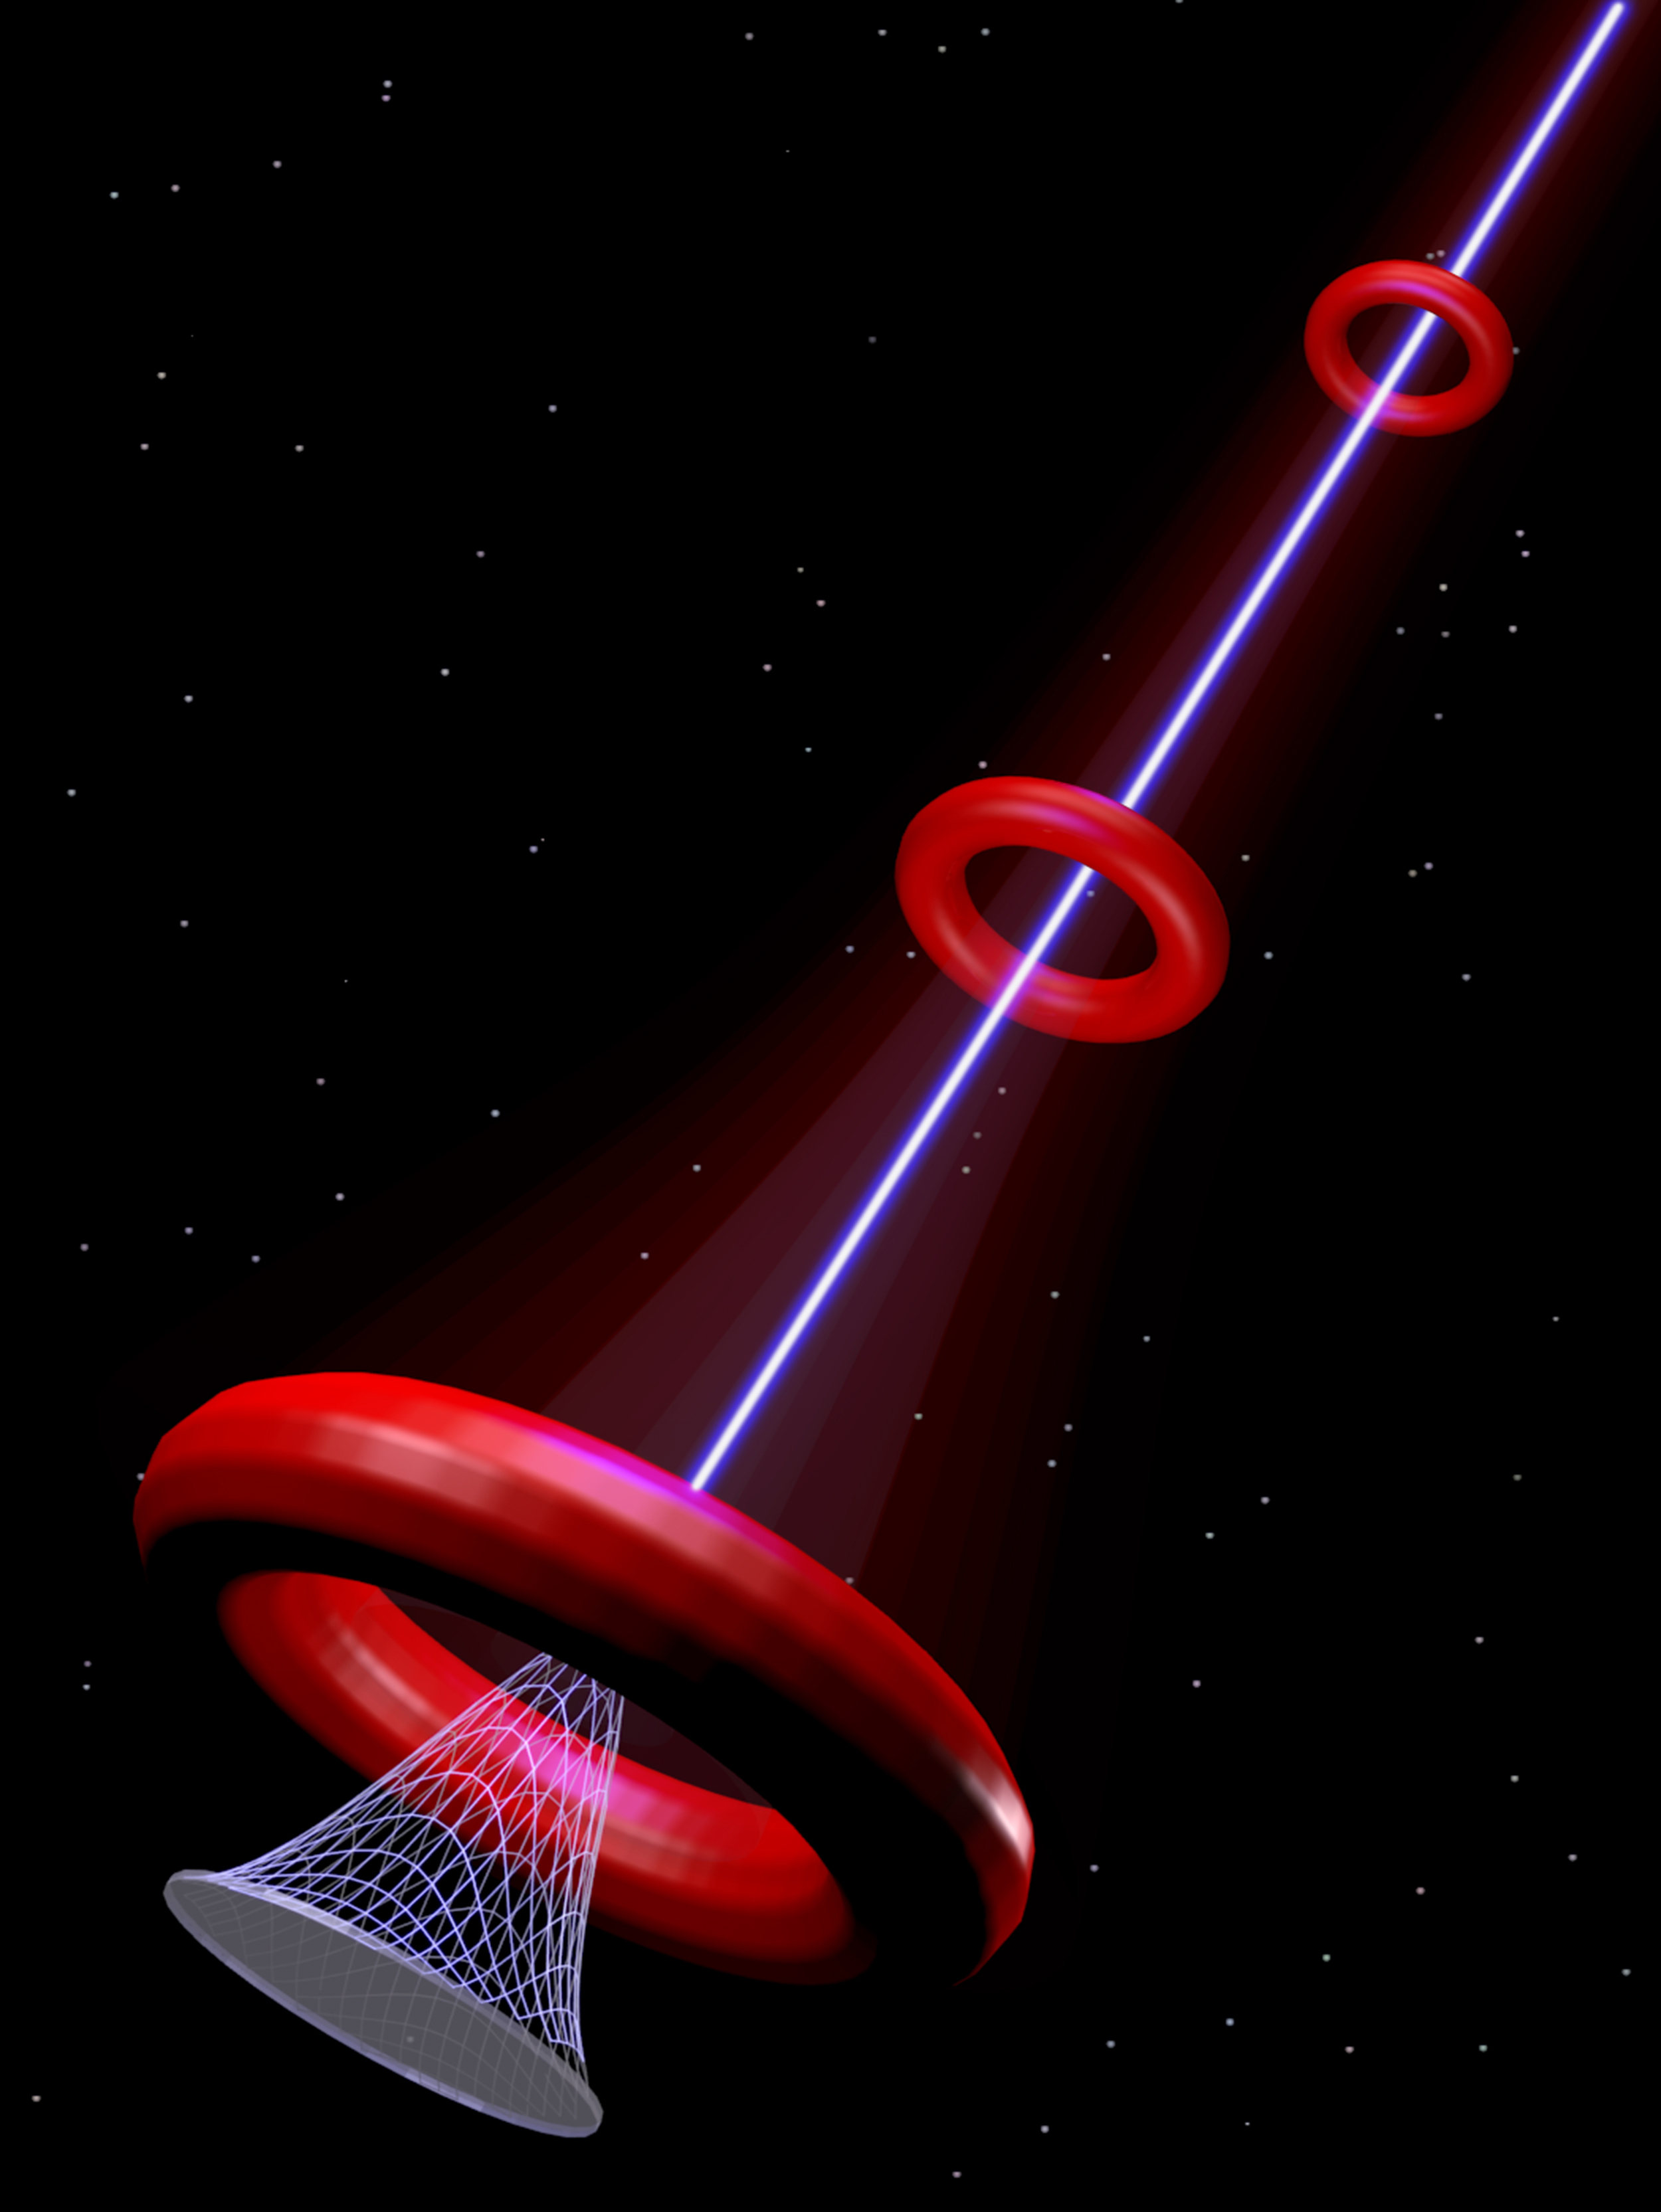 Illustration of a high-intensity laser dressed with a secondary laser that helps provide fuel to extend the distance of the primary beam.